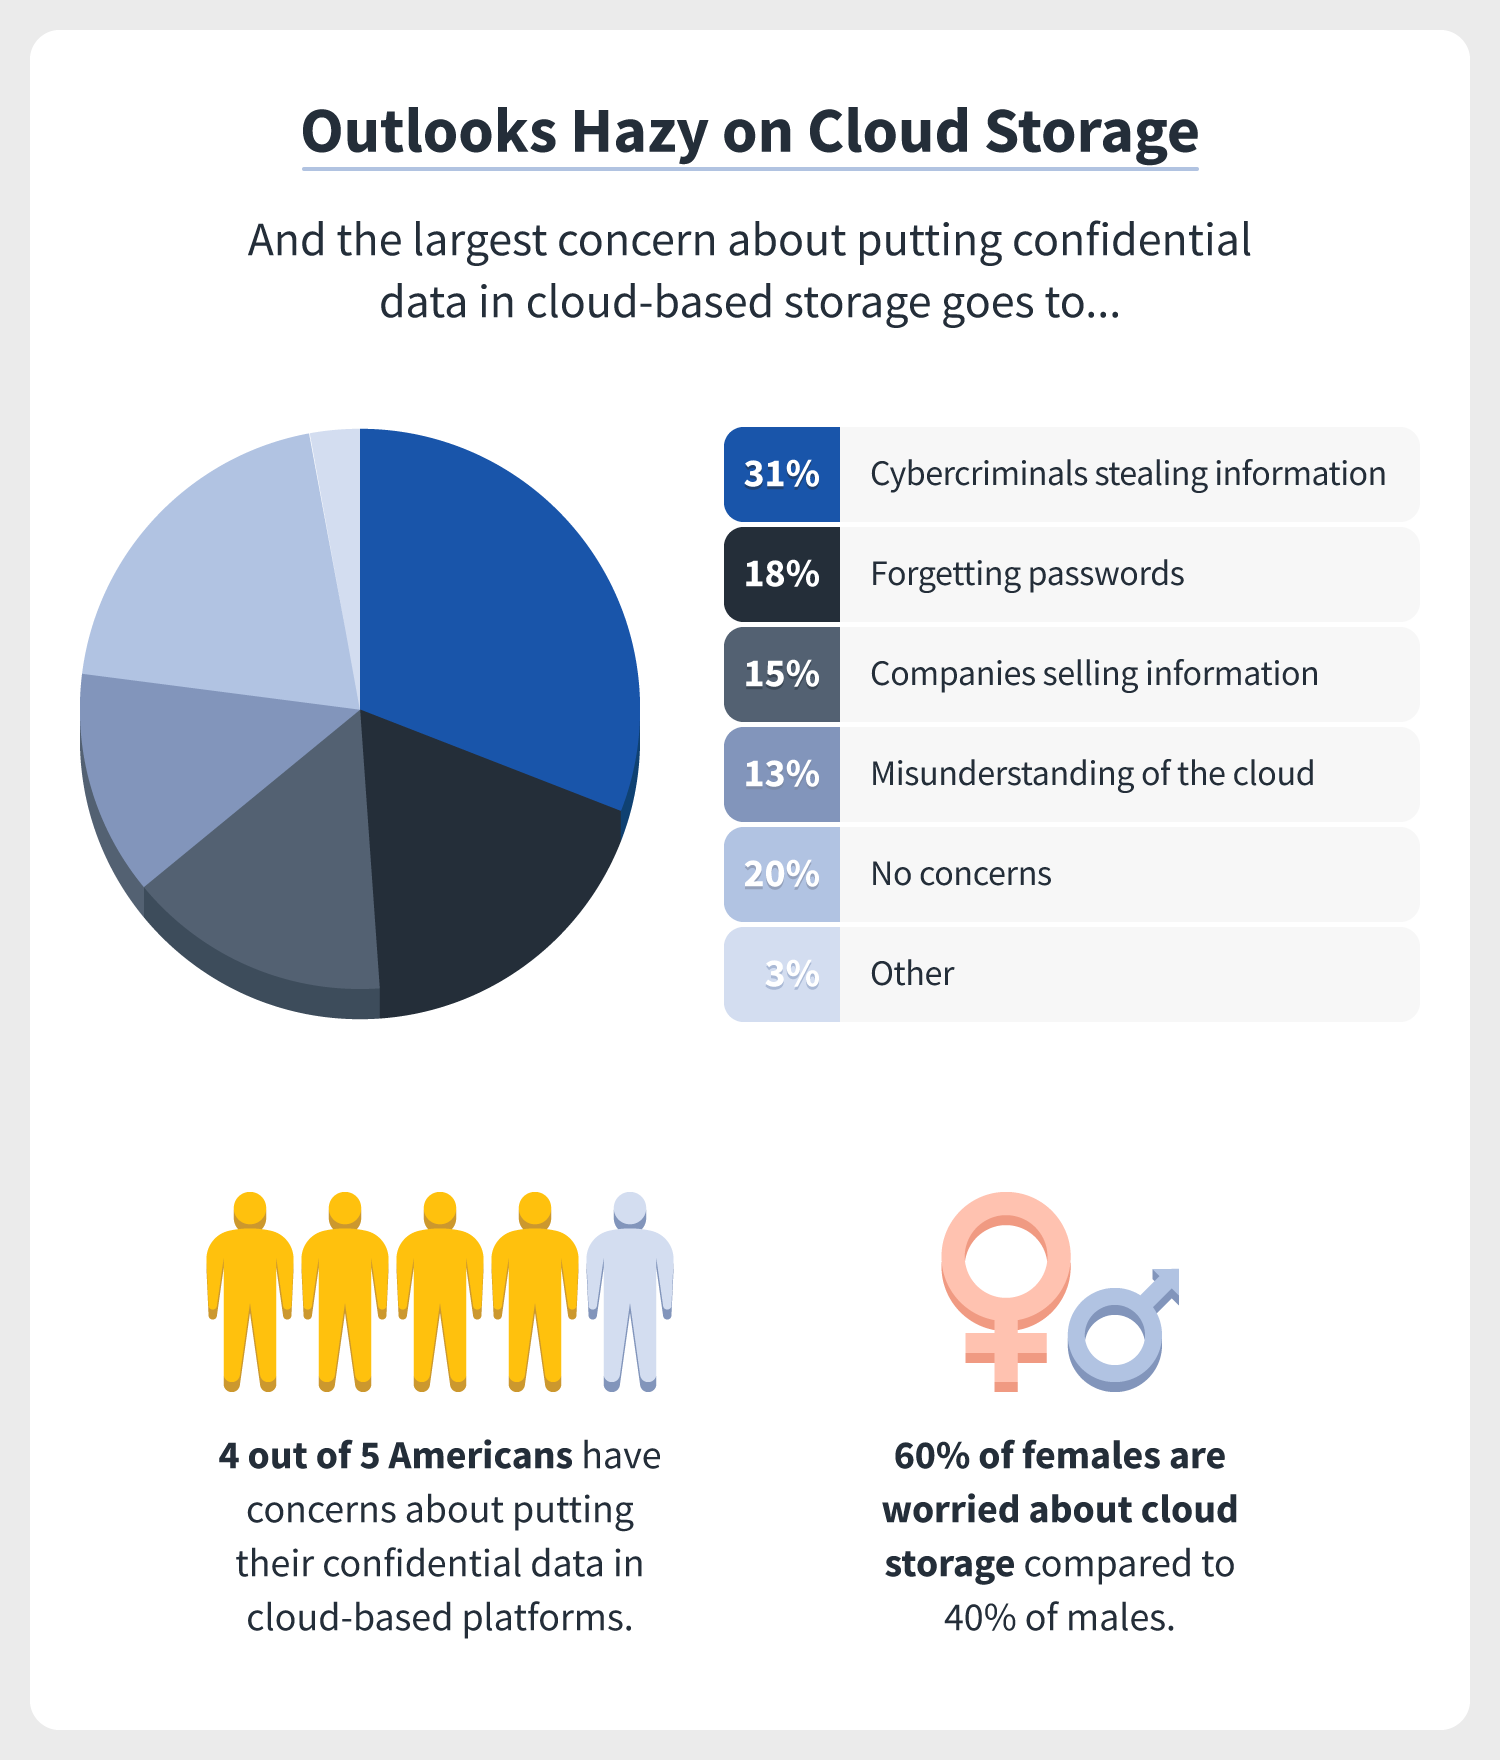 an overview of the confidential data survey results and the finding that Americans are most concerned about cybercriminals accessing their confidential data, if it’s stored in the cloud